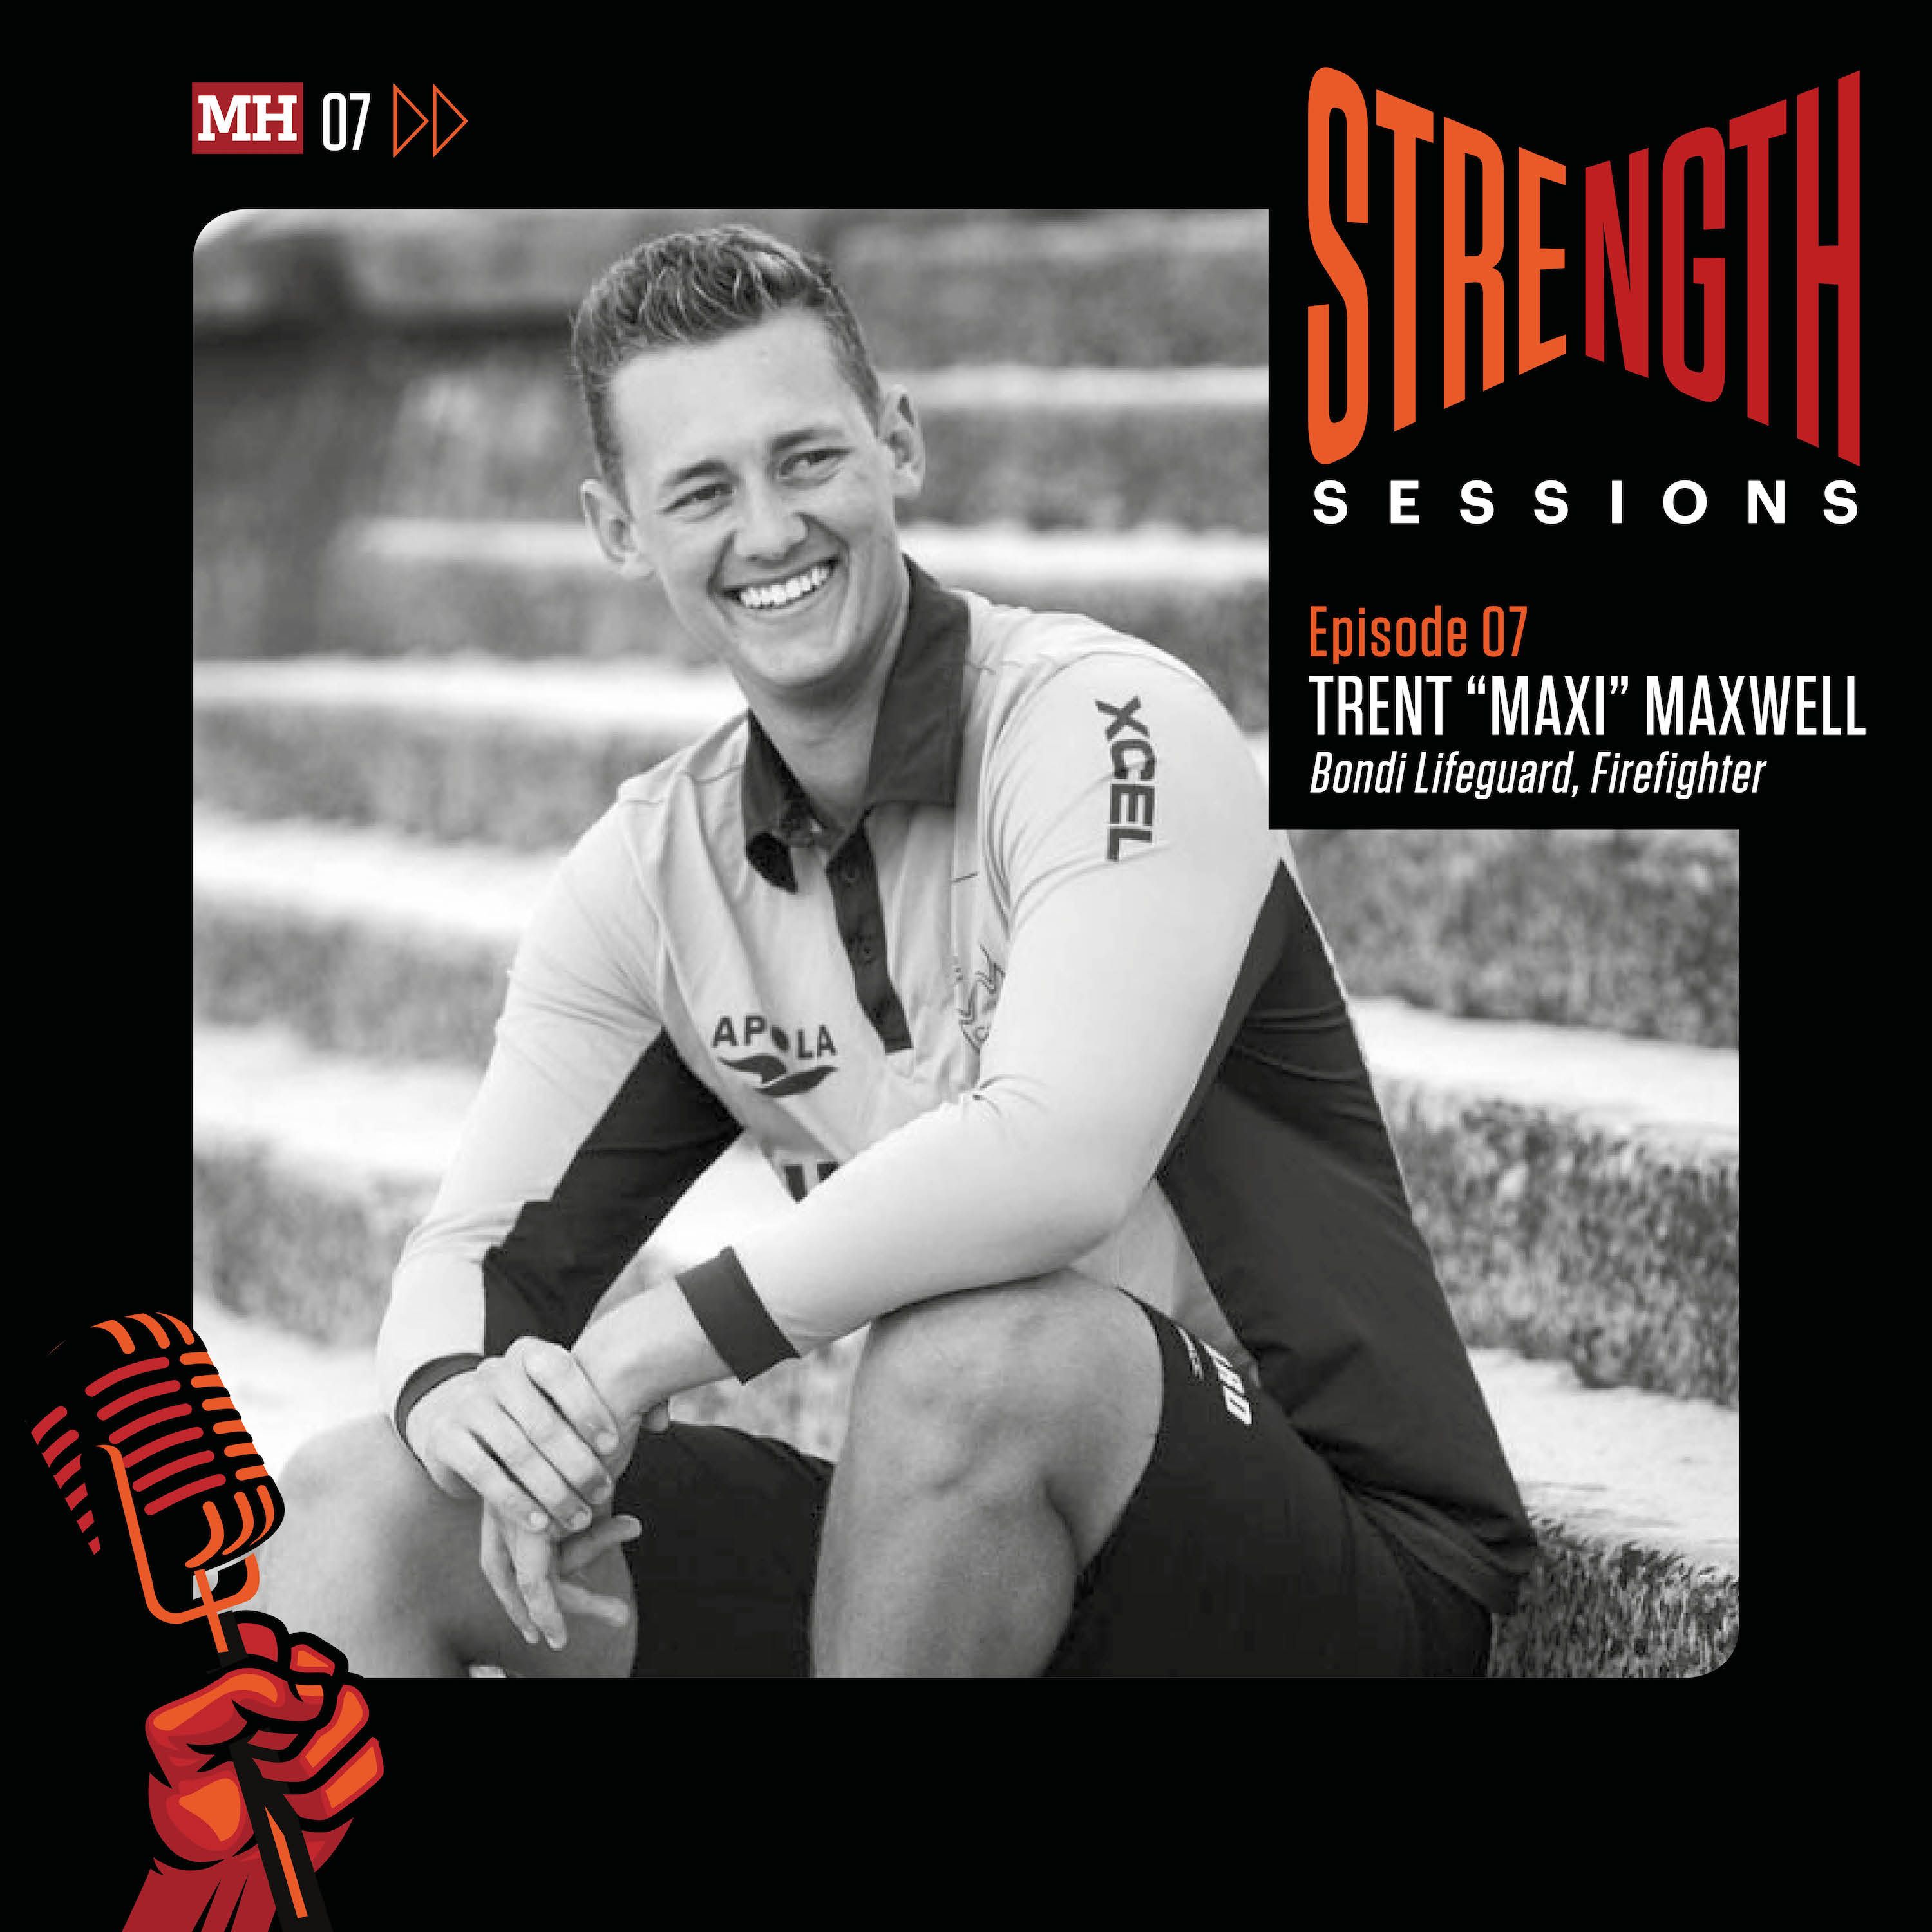 Trent Maxwell: Coping with unimaginable stress & maintaining a positive mindset